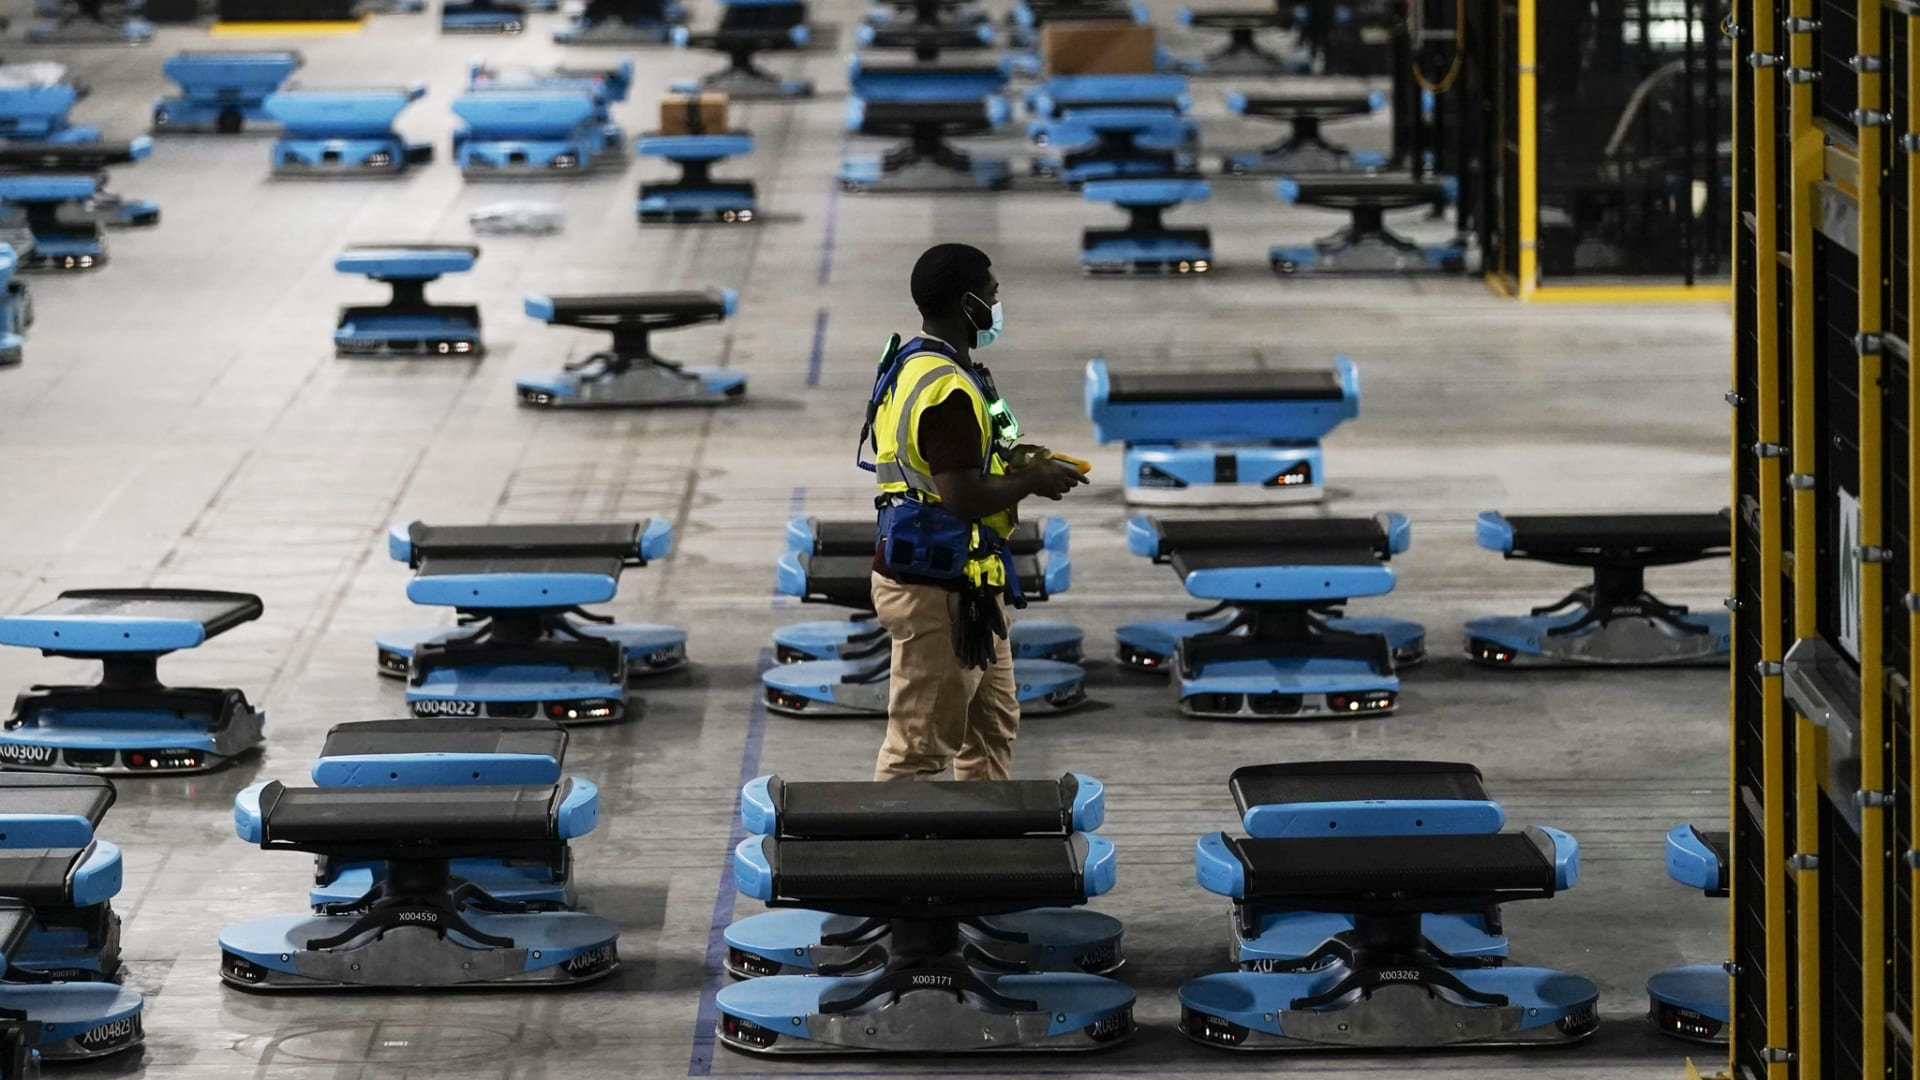 2022 Will Be the Year of the Worker. Here's Why It Will Also Be the Year of the Robot